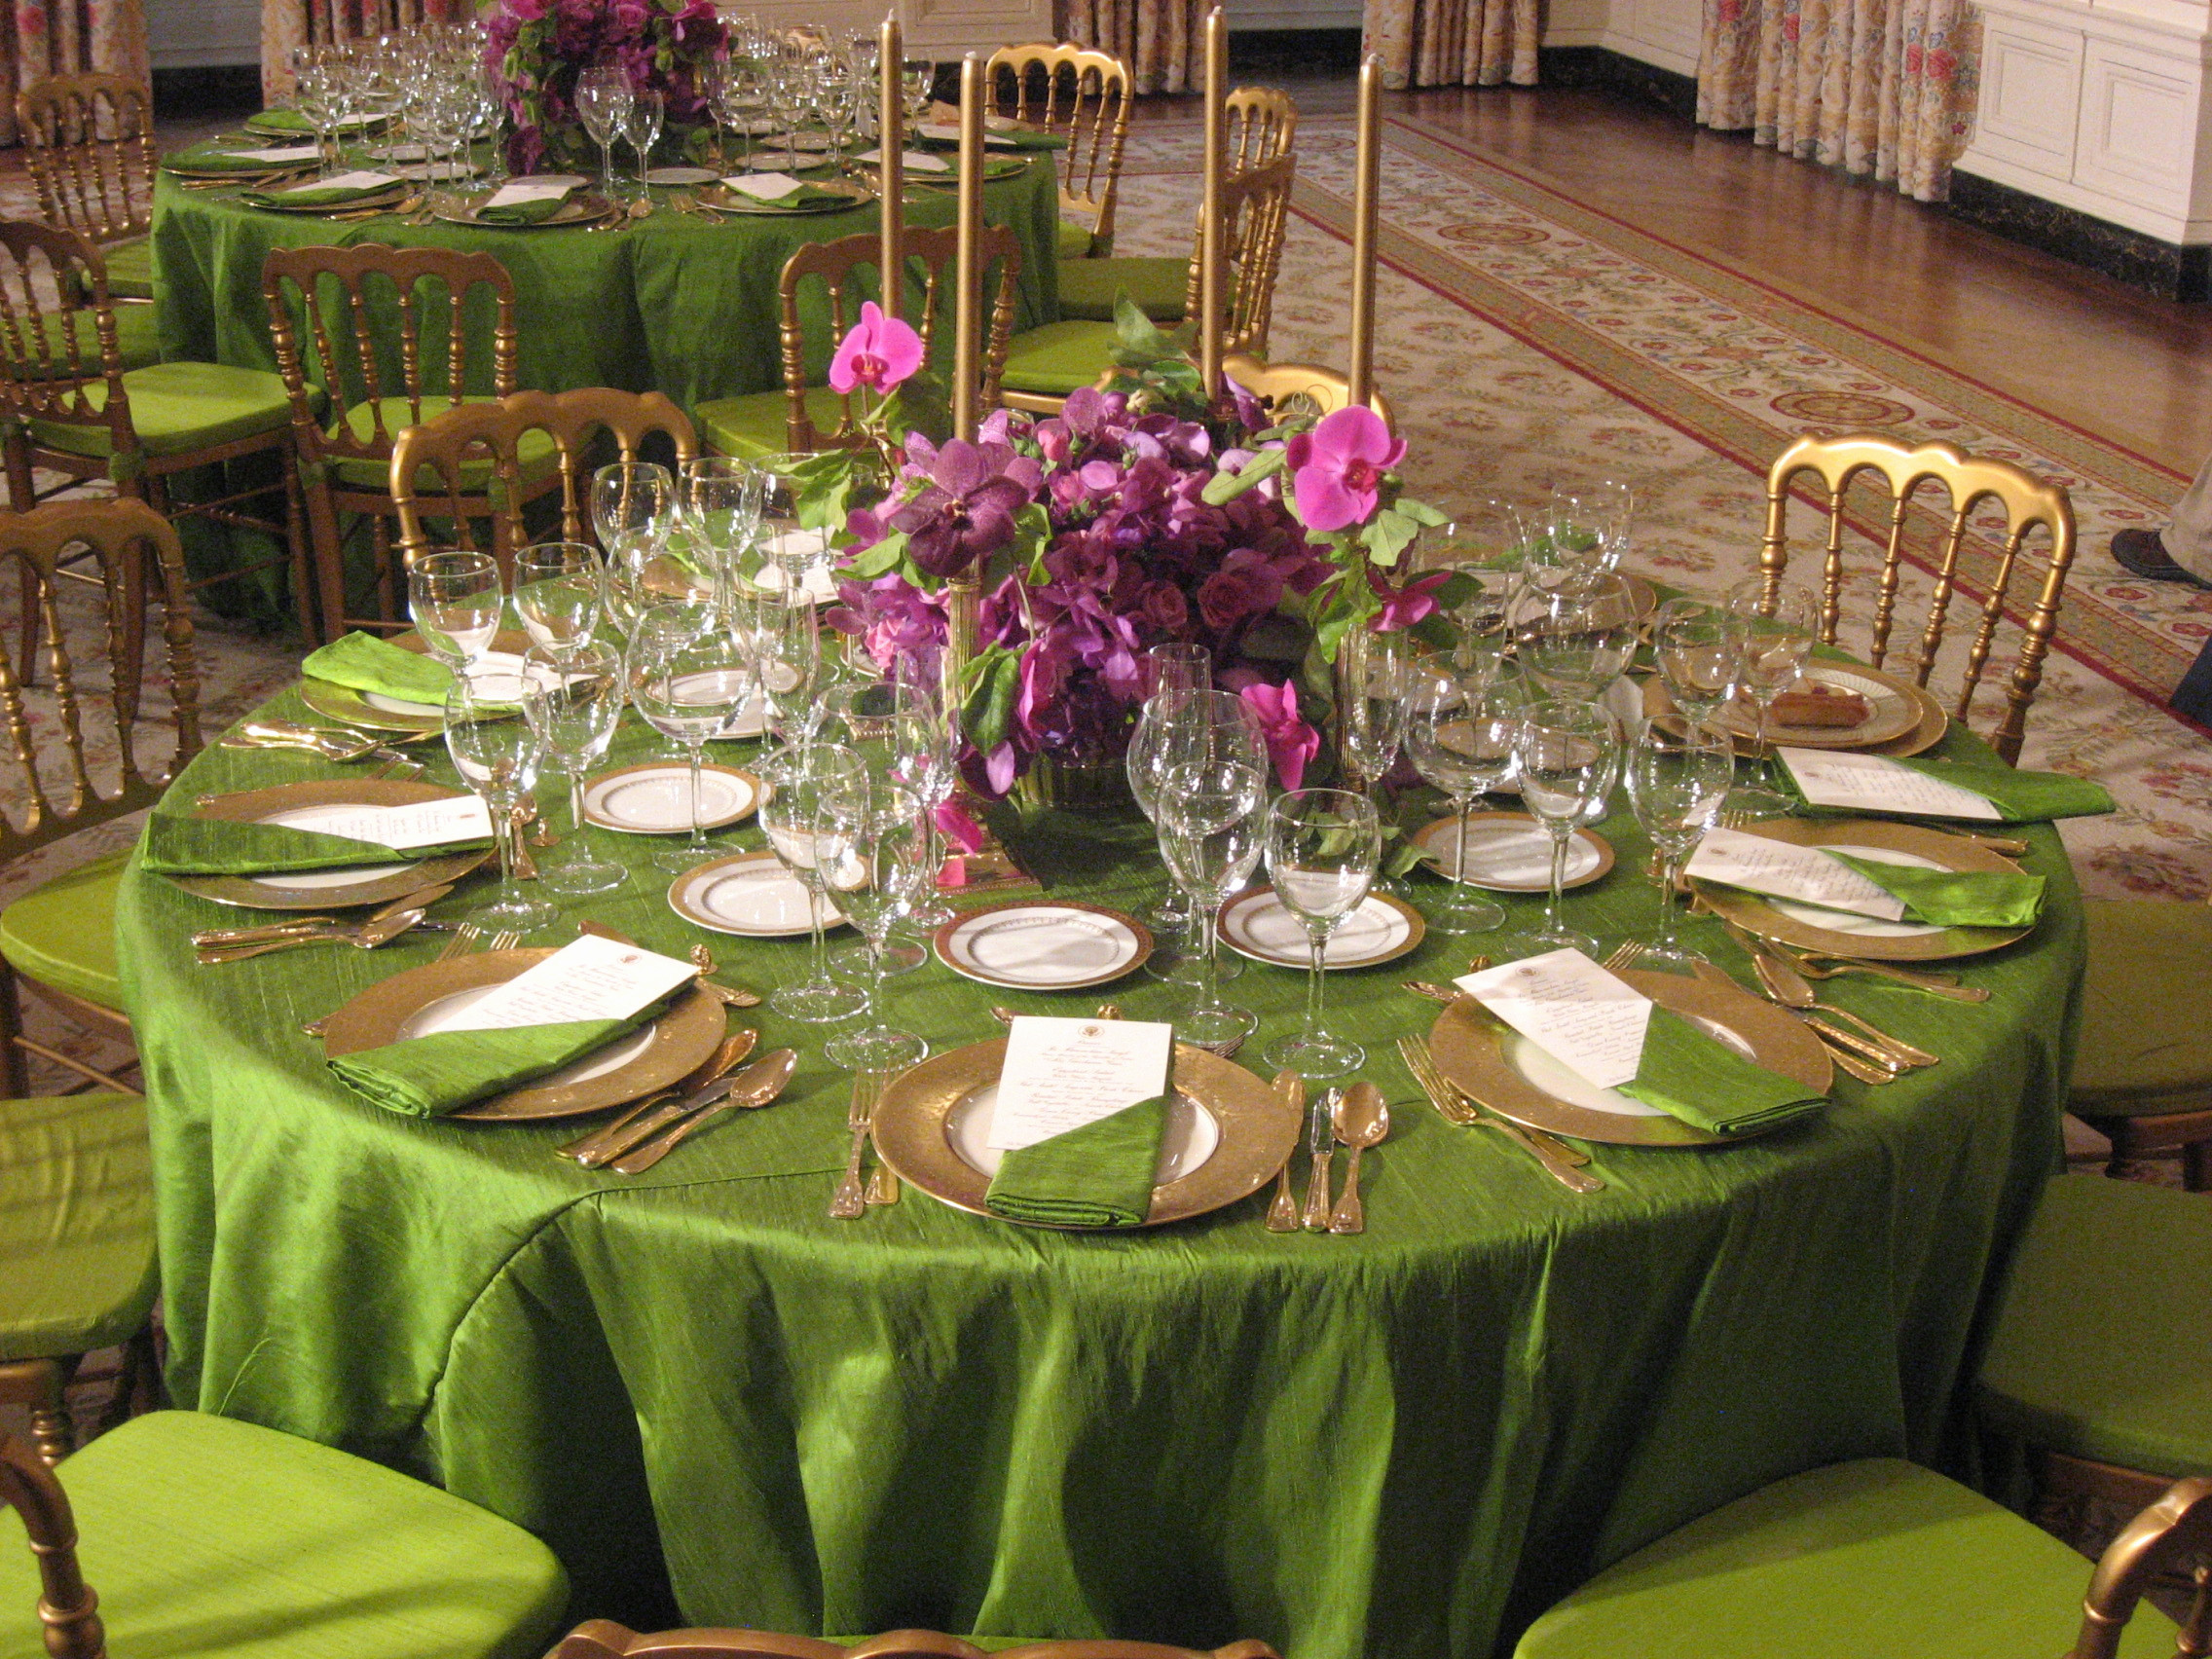 24 Best Glass Vases wholesale In Los Angeles 2024 free download glass vases wholesale in los angeles of awesome chiavari chairs wholesale wholesale tablecloths in los throughout amazing awesome chiavari chairs wholesale wholesale tablecloths in los angel